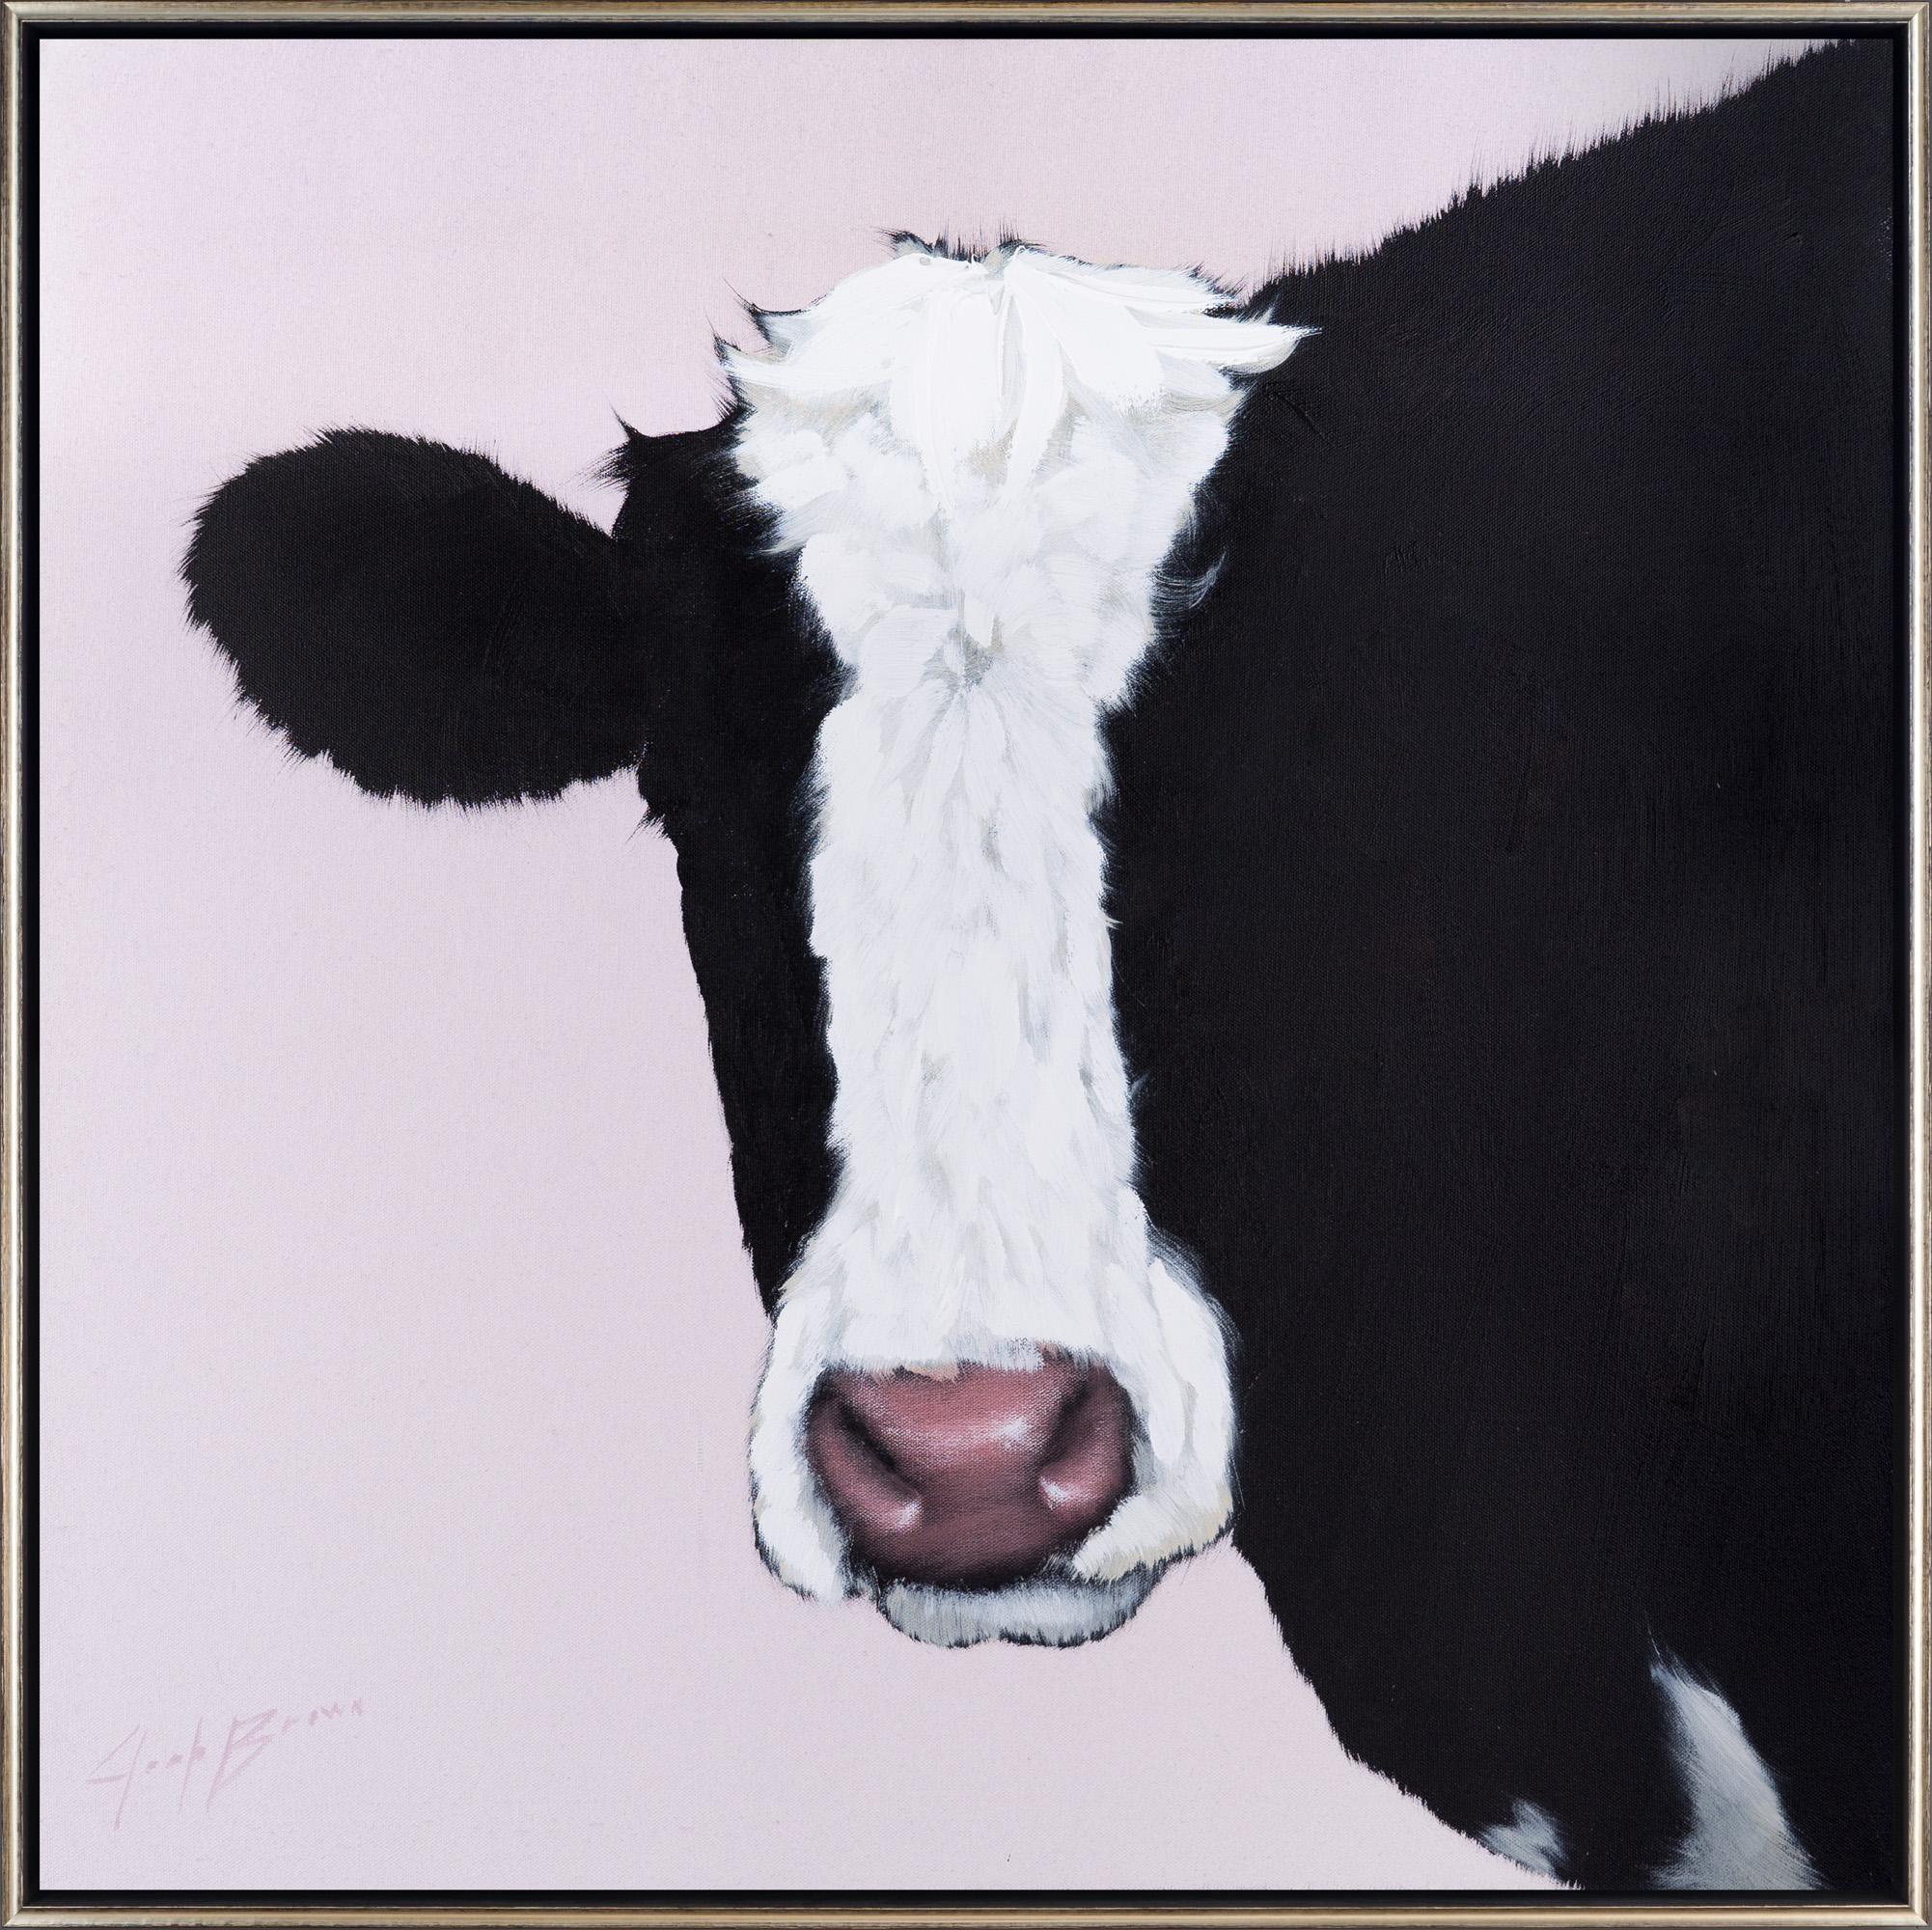 Joshua Brown Animal Painting - "Cow 2" Contemporary Animal Portrait Oil and Acrylic on Canvas Framed Painting